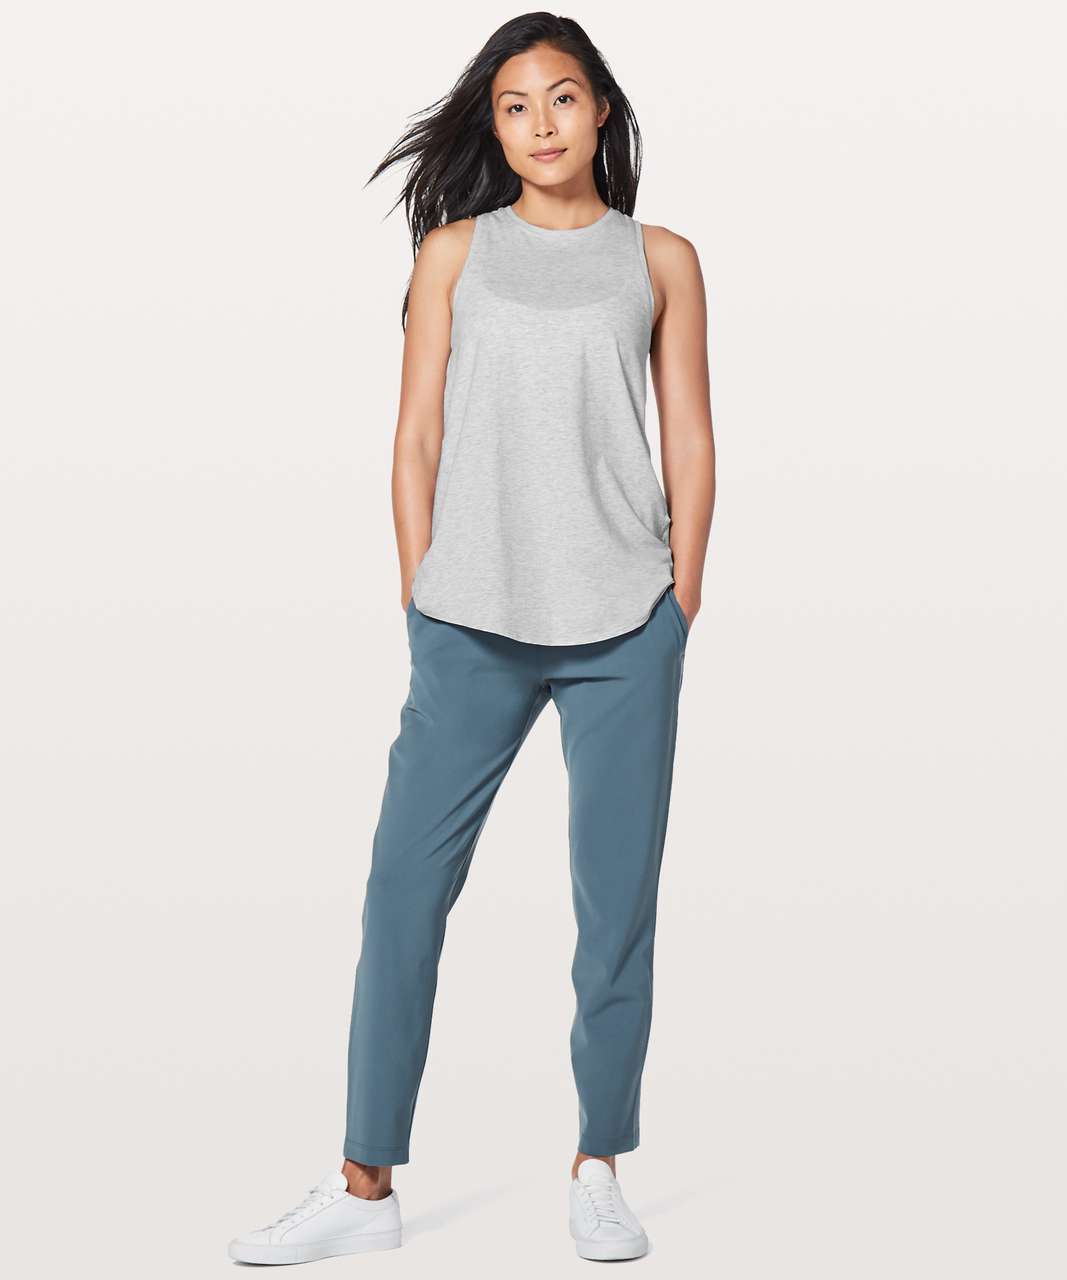 Lululemon All Tied Up Tank - Heathered Core Ultra Light Grey (First Release)